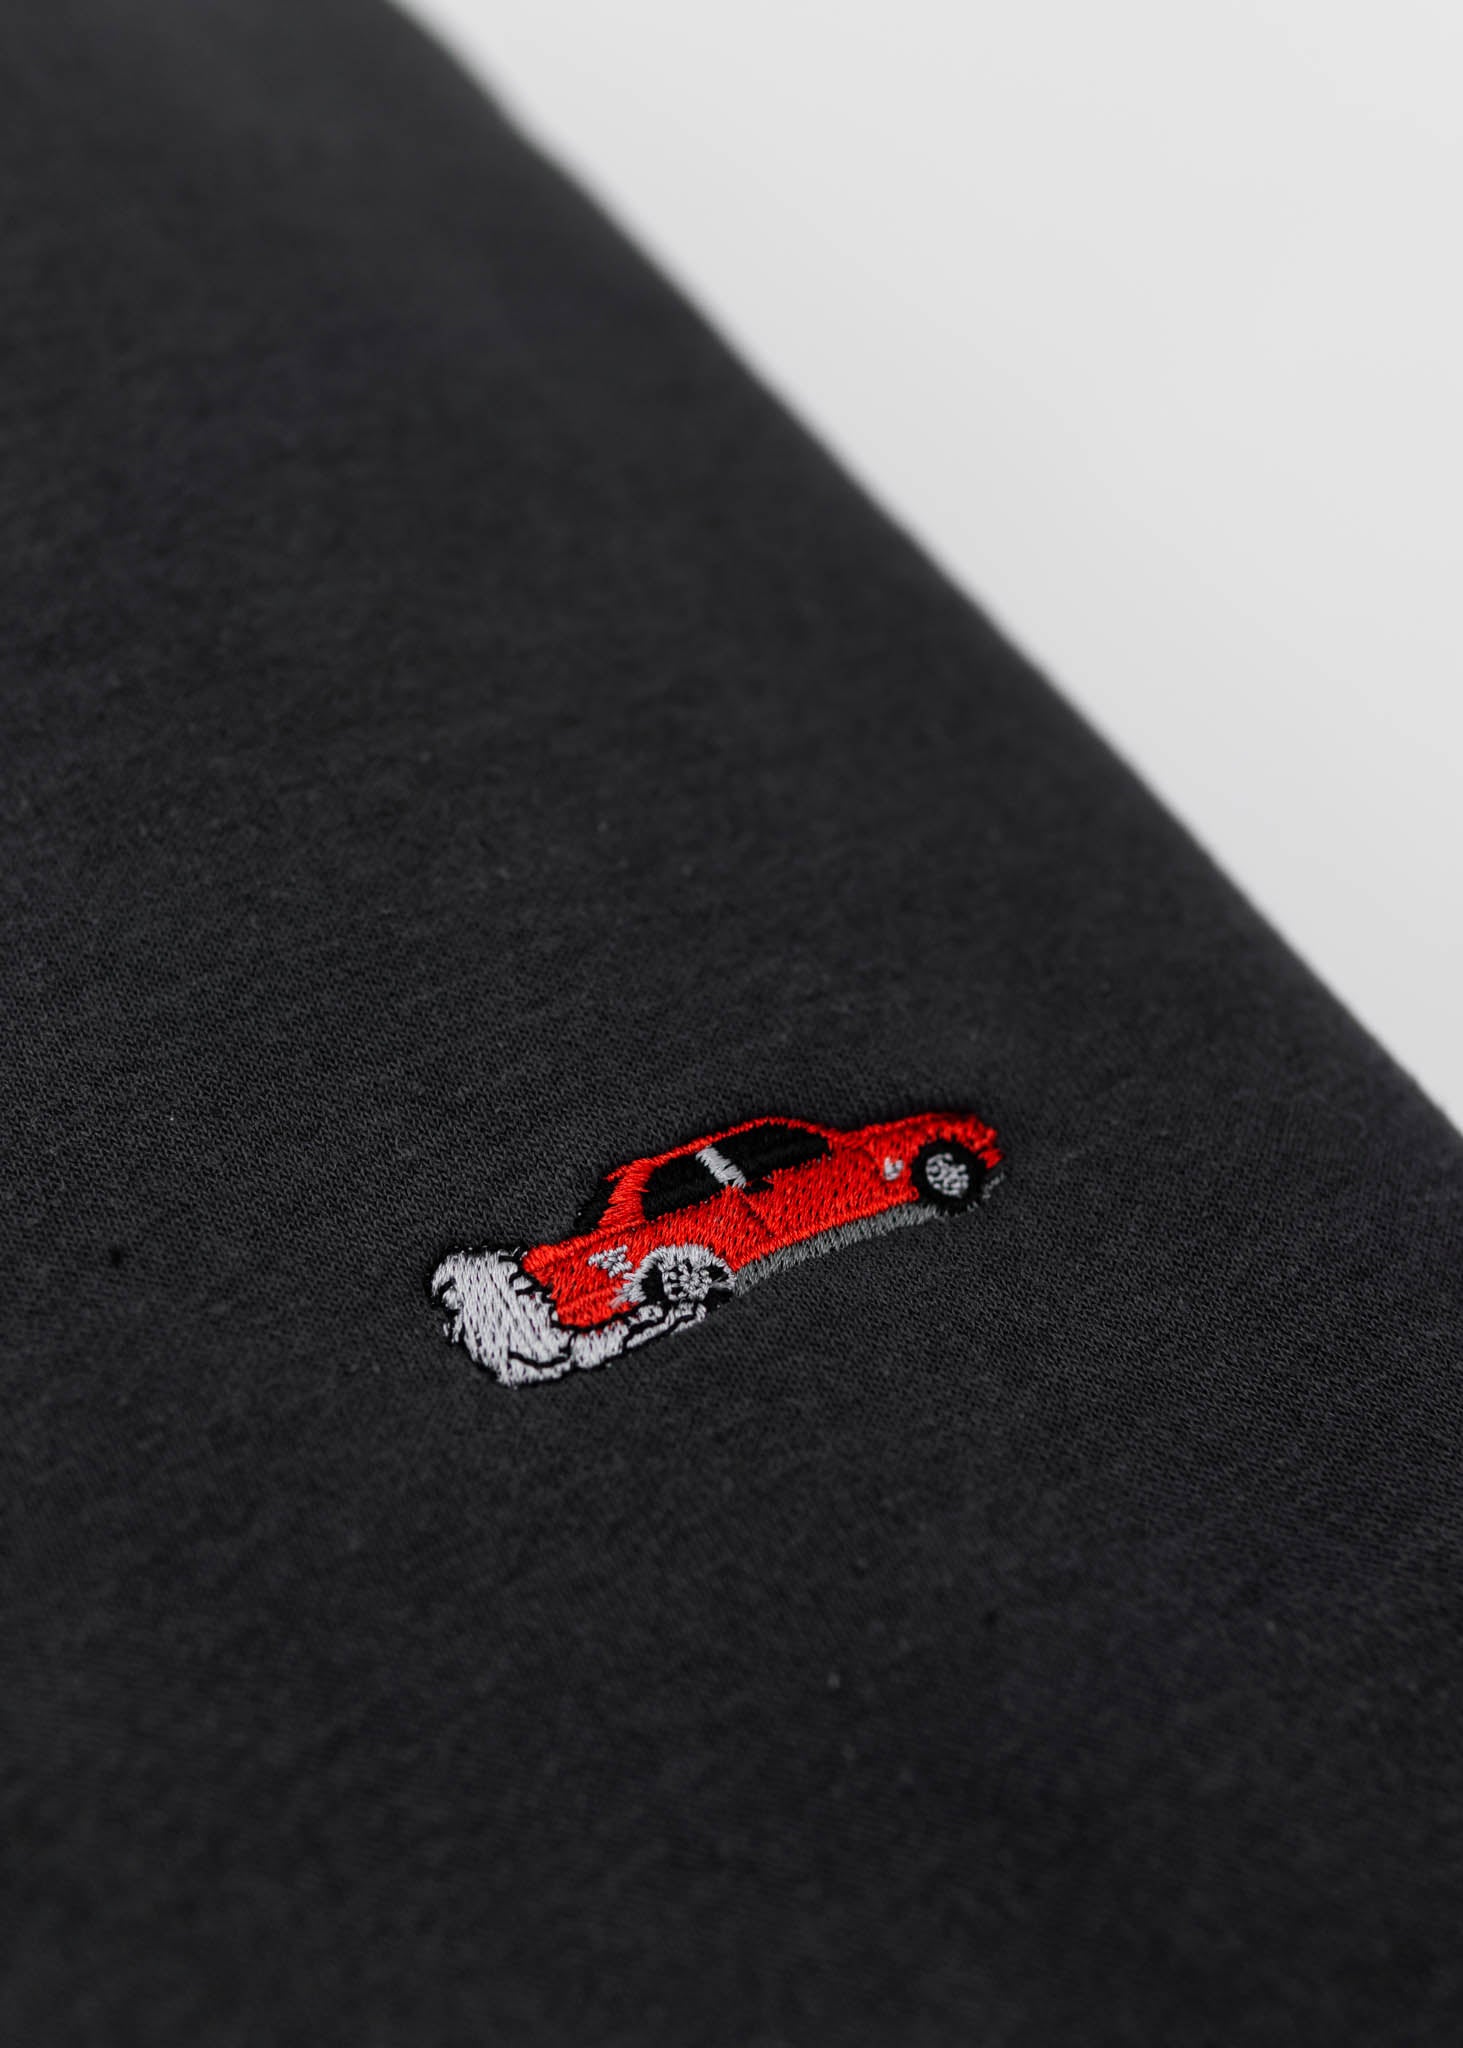 A dark grey BMW/Bimmer E30 M3 crewneck sweater for men. Photo is a close up of the sweater with an embroidered red BMW E30 M3 doing a burnout. Fabric is 100% cotton and high quality and fits to size. The style is long sleeve, crew neck, and embroidery on left chest.